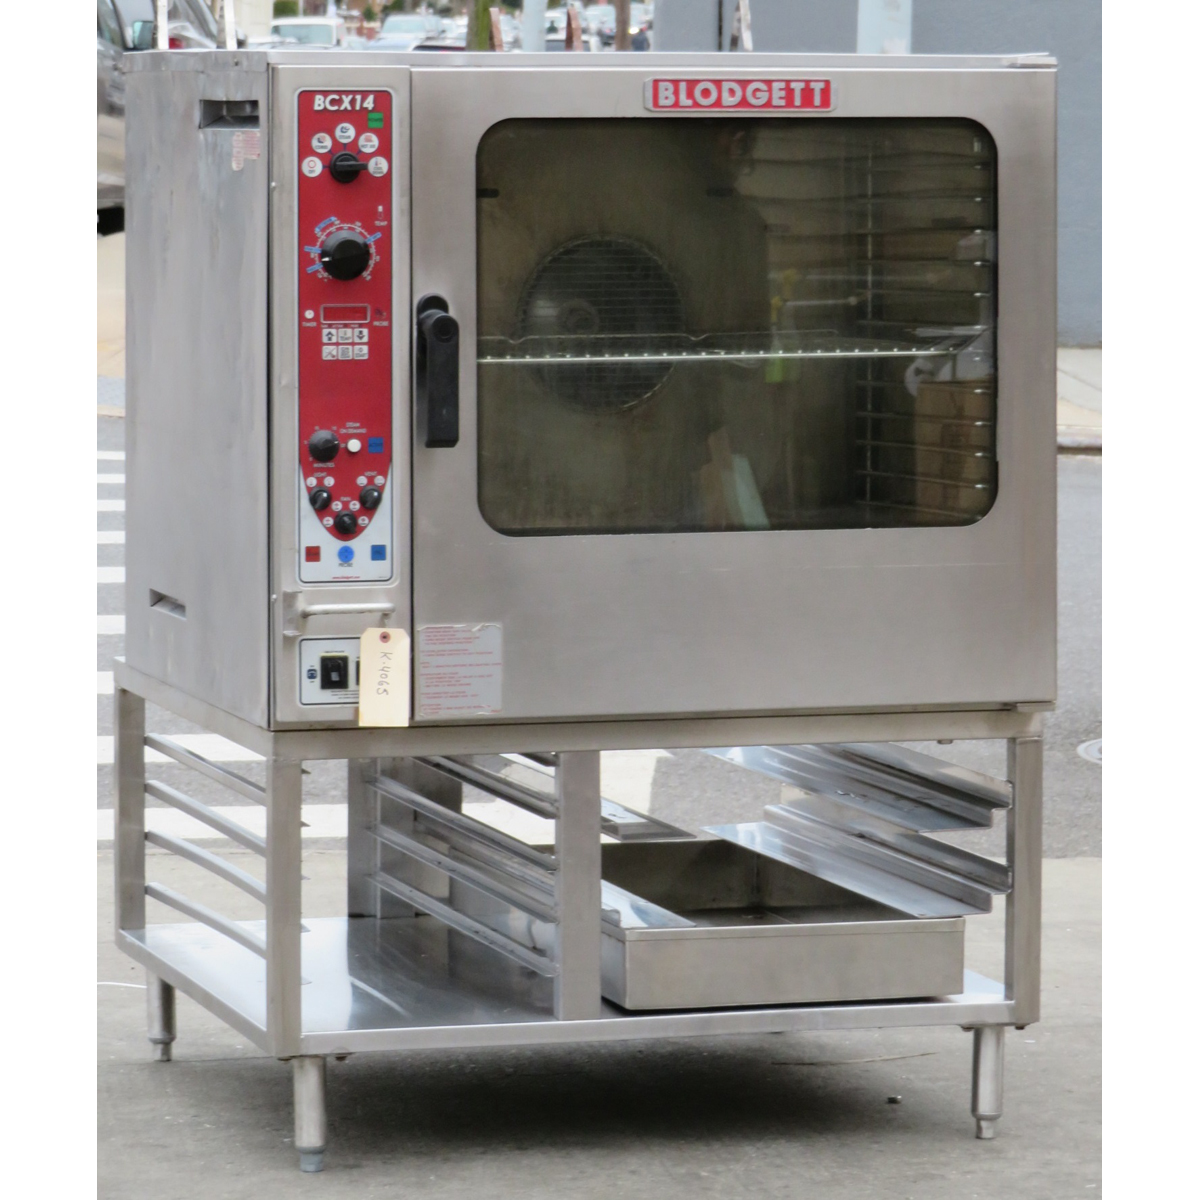 Blodgett BCX14 Combi Oven Natrual Gas, Used Excellent Condition image 1